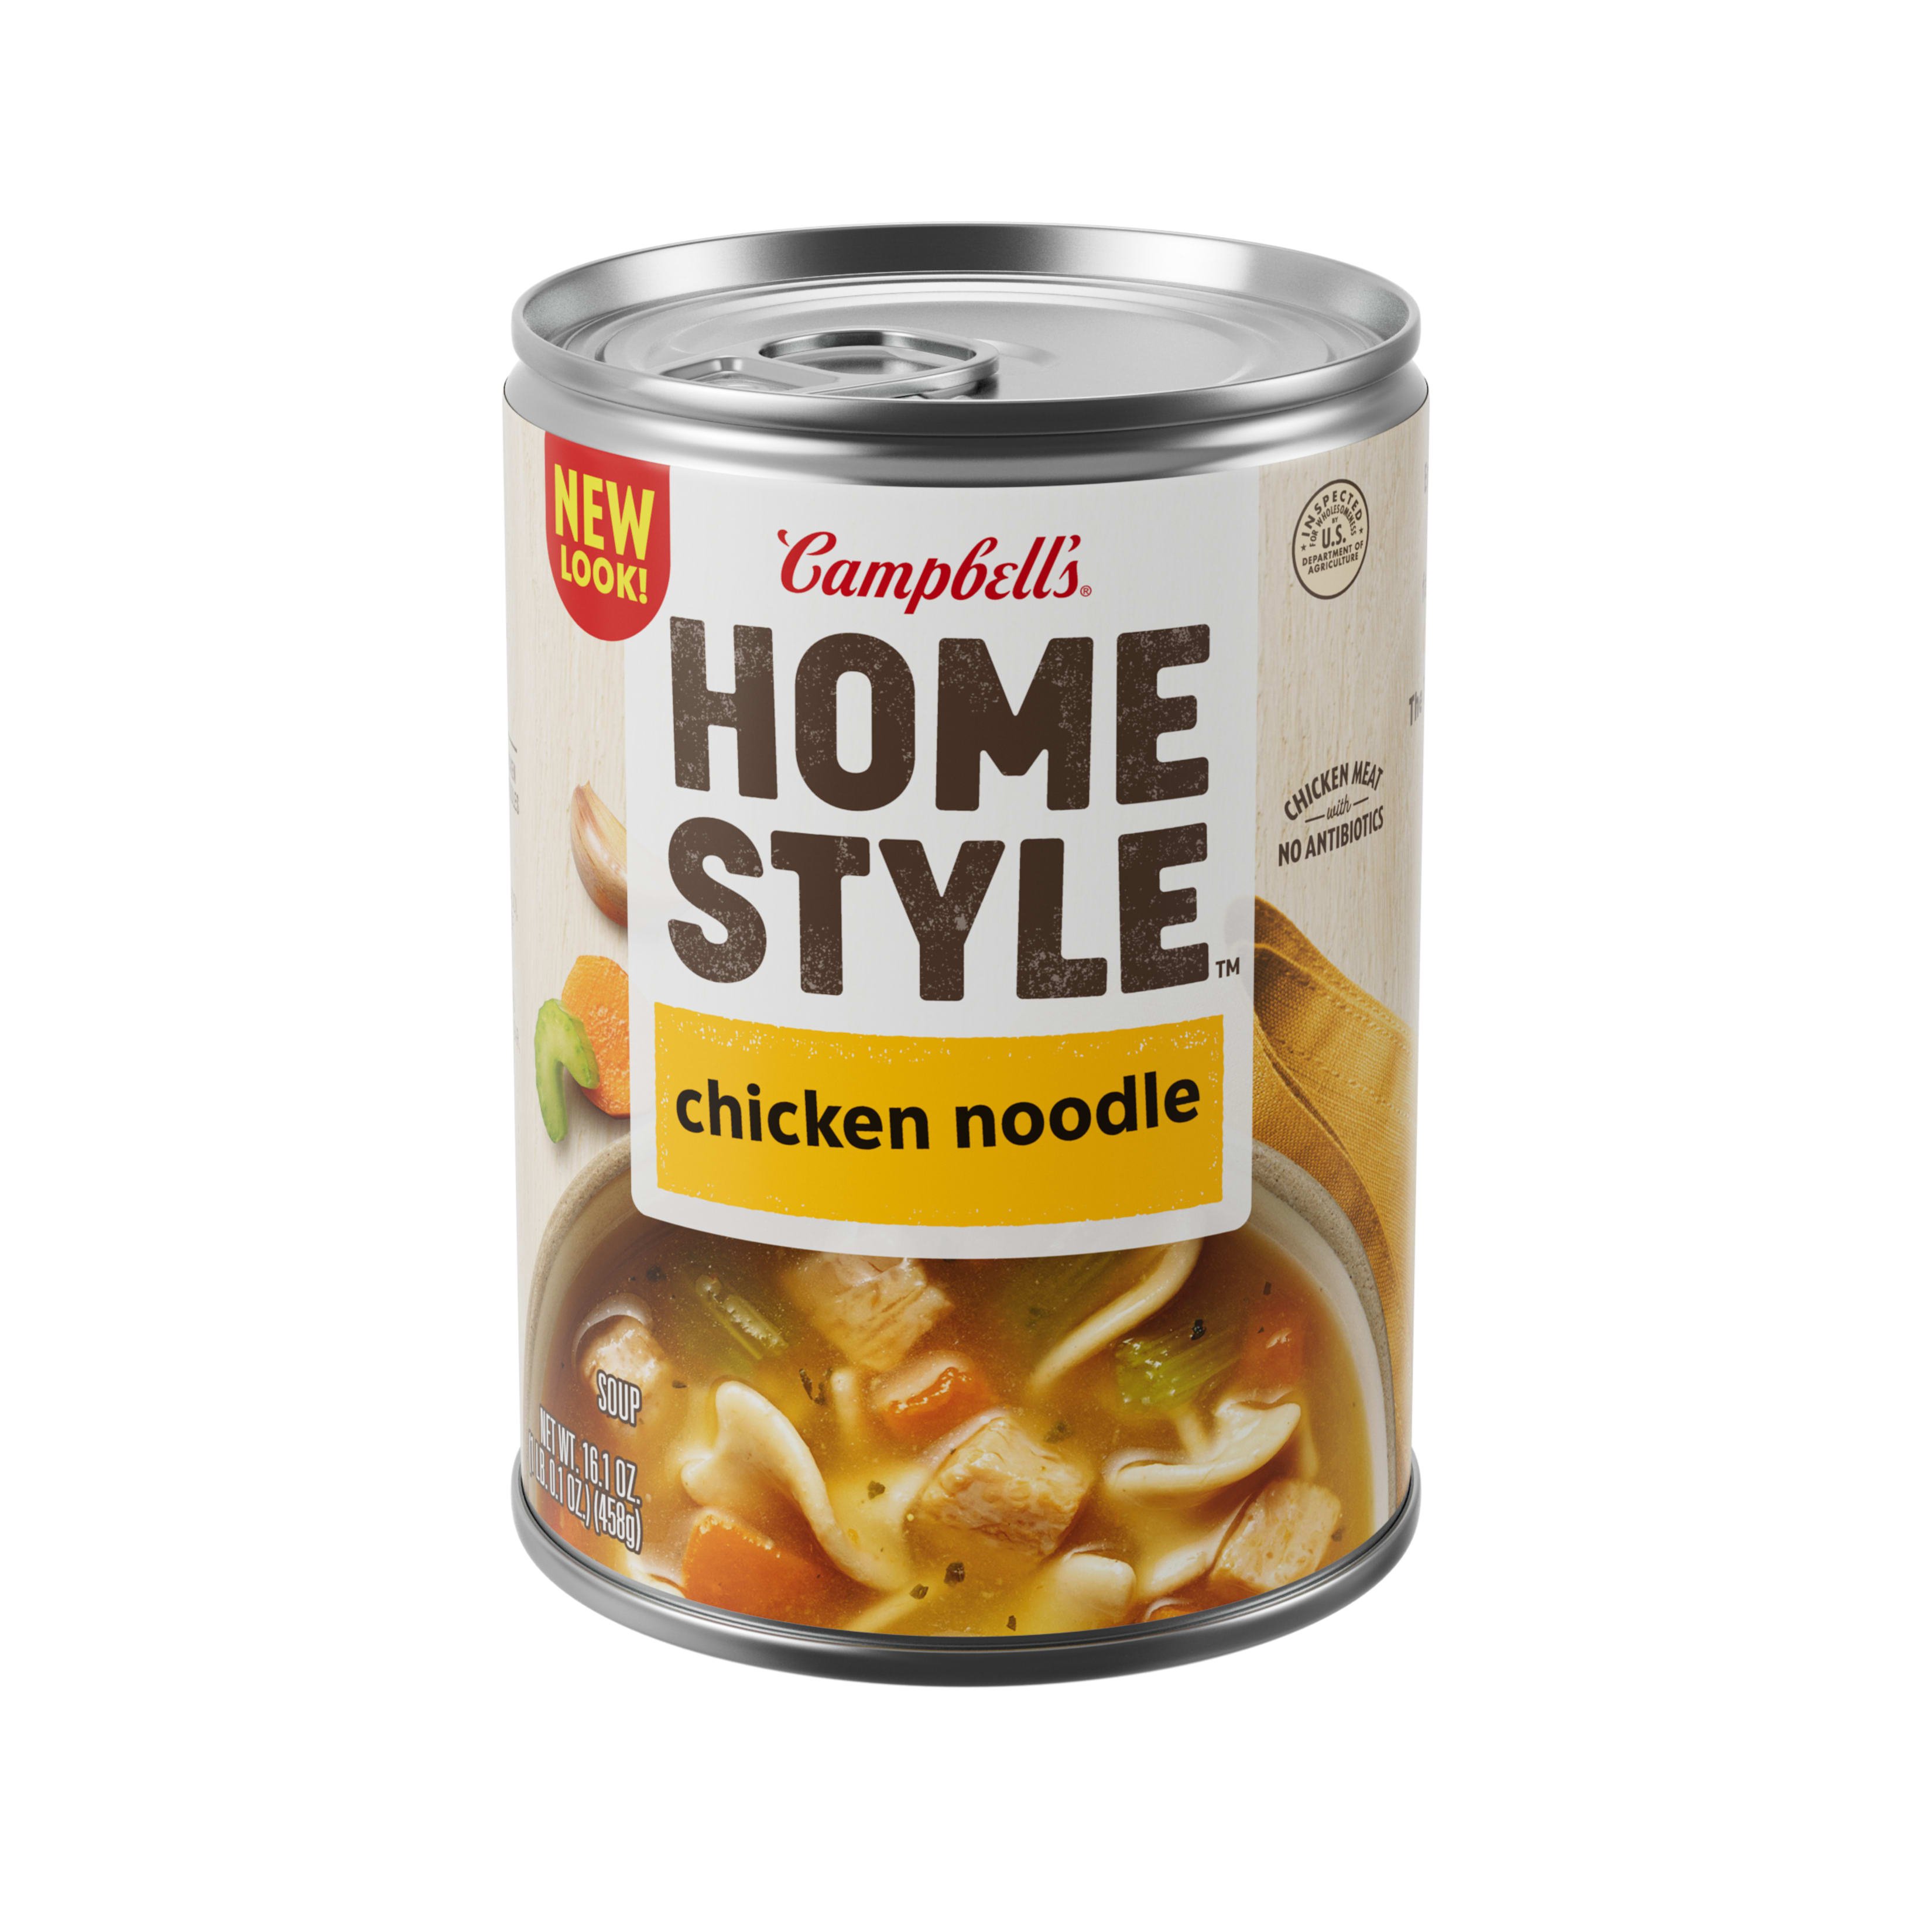 Campbell's Homestyle Chicken Noodle Soup - Shop Soups & Chili at H-E-B